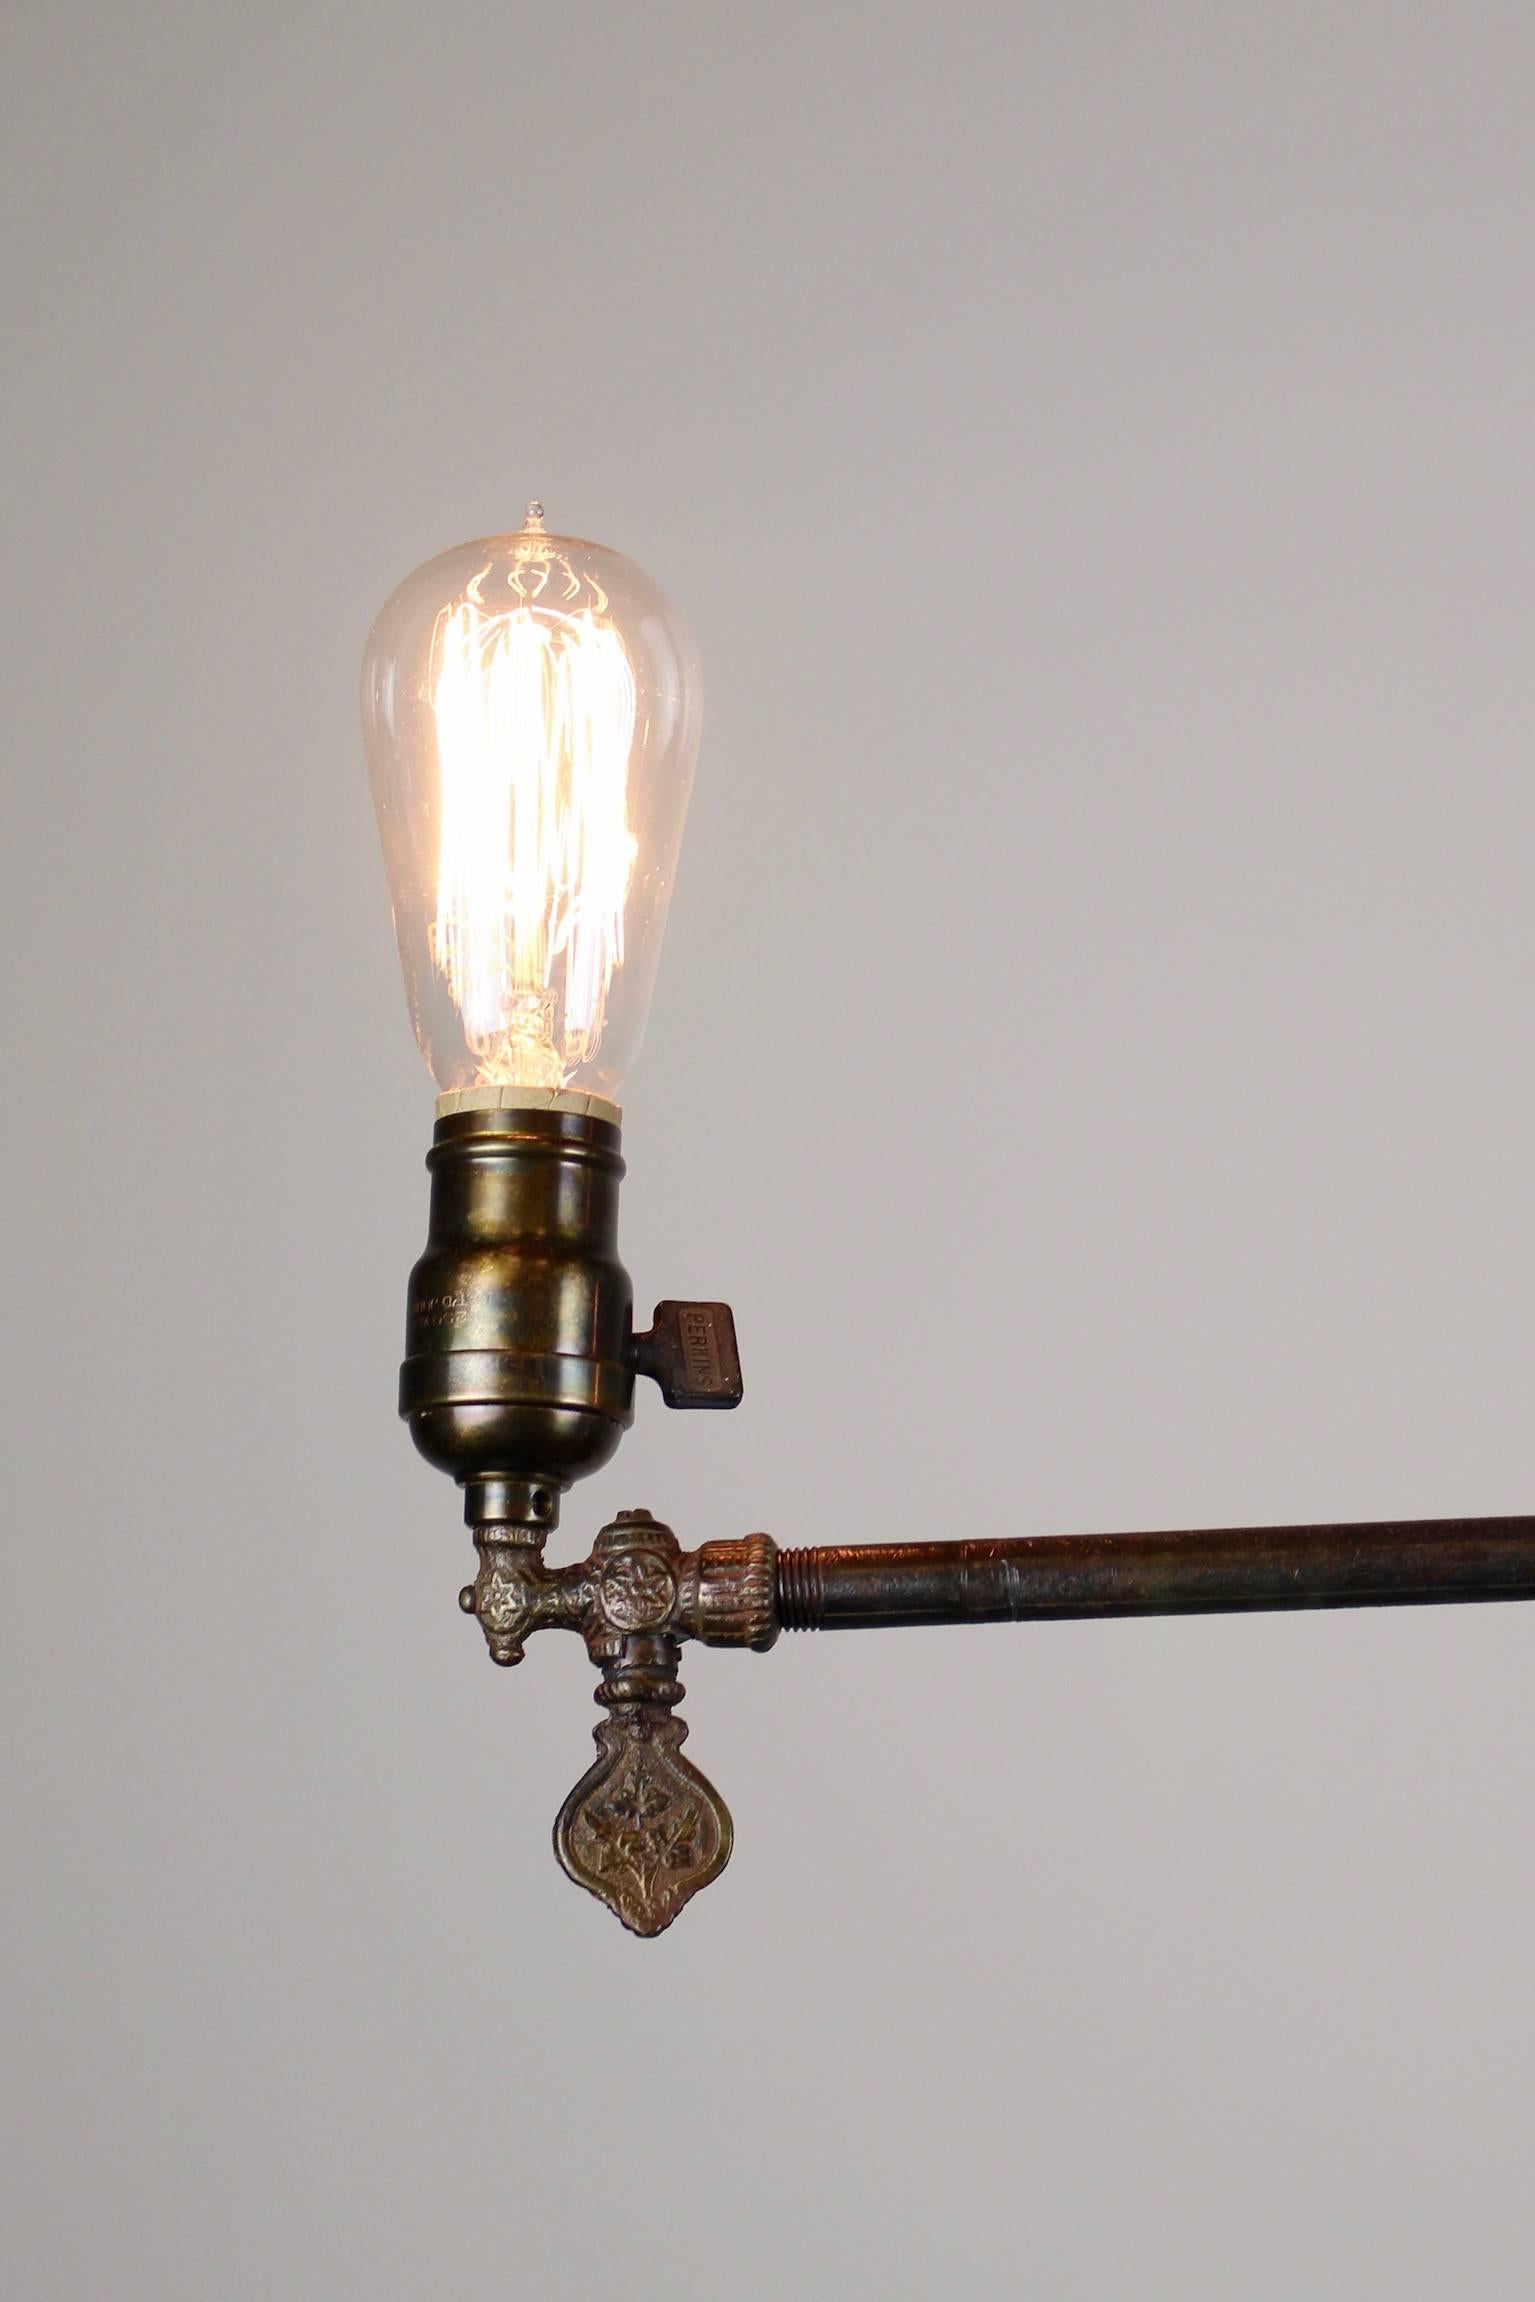 American Original Industrial Gas Light Fixture, circa 1885 by Archer & Pancoast For Sale